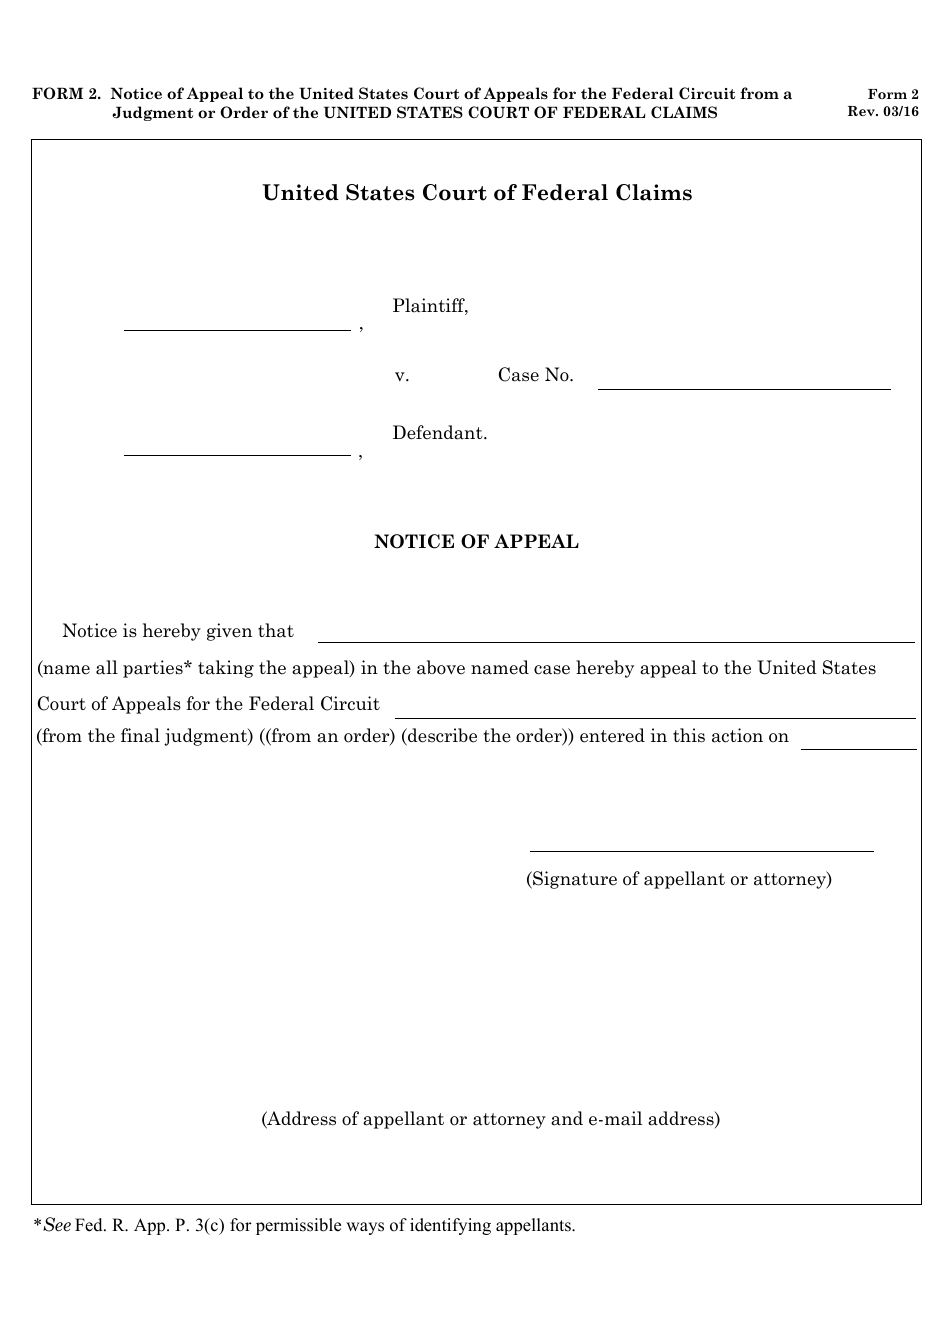 Form 2 Notice of Appeal to the United States Court of Appeals for the Federal Circuit From a Judgment or Order of the United States Court of Federal Claims, Page 1